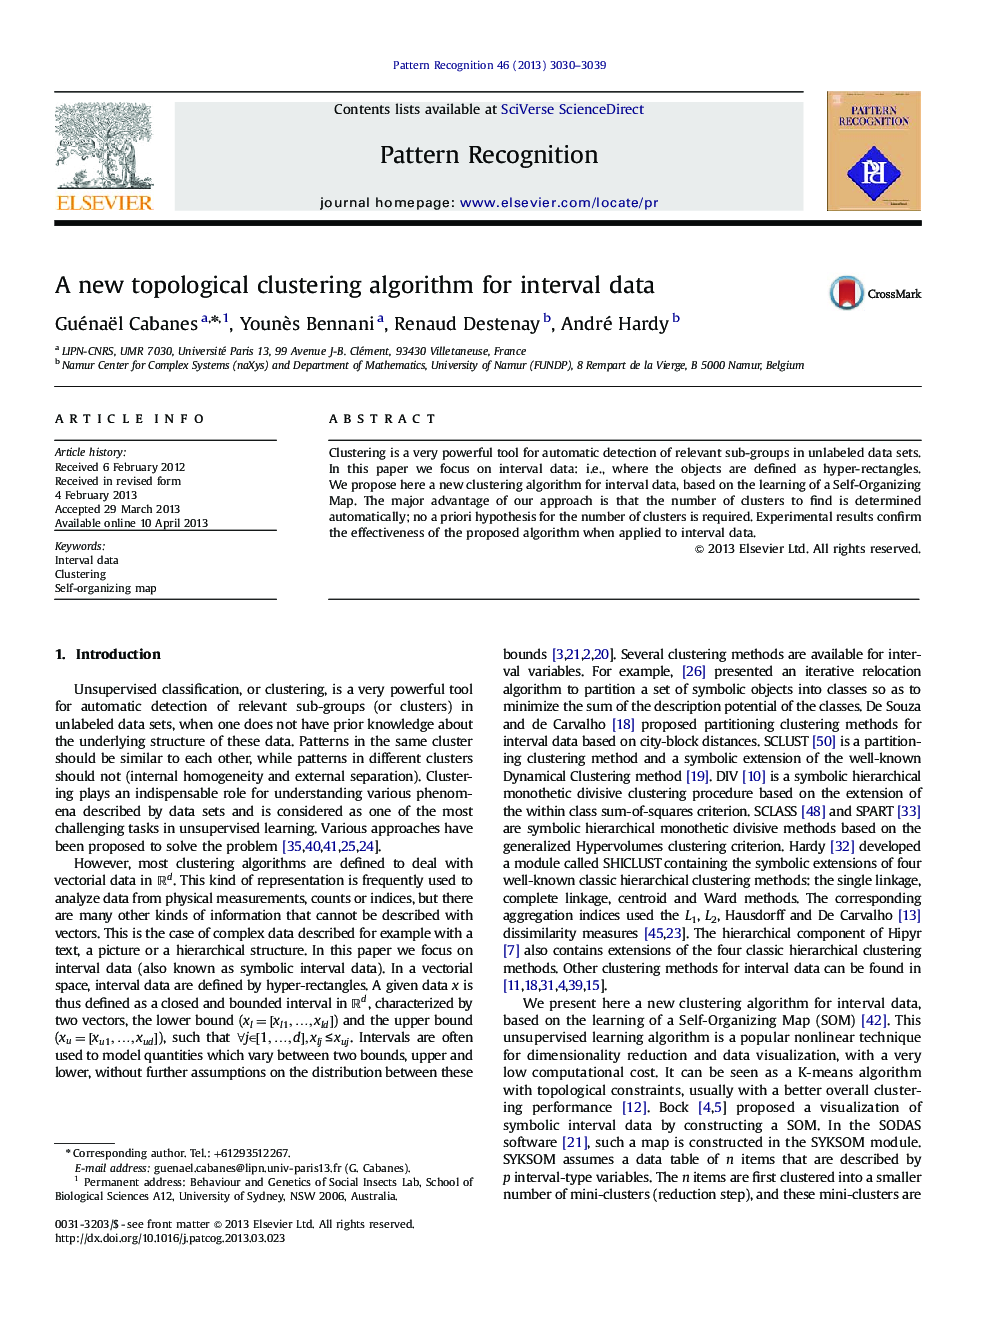 A new topological clustering algorithm for interval data